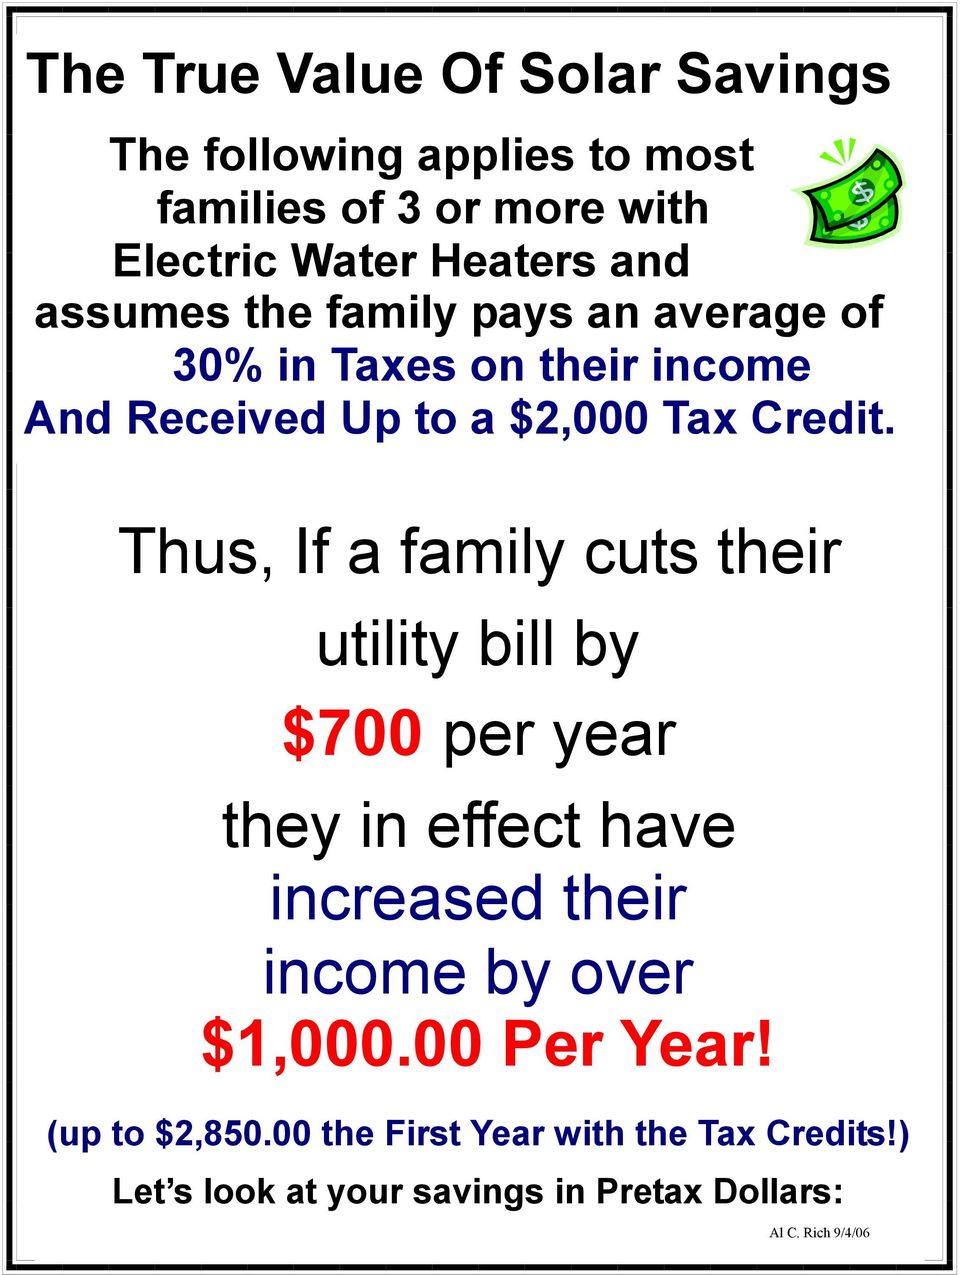 Thus, If a family cuts their utility bill by $700 per year they in effect have increased their income by over